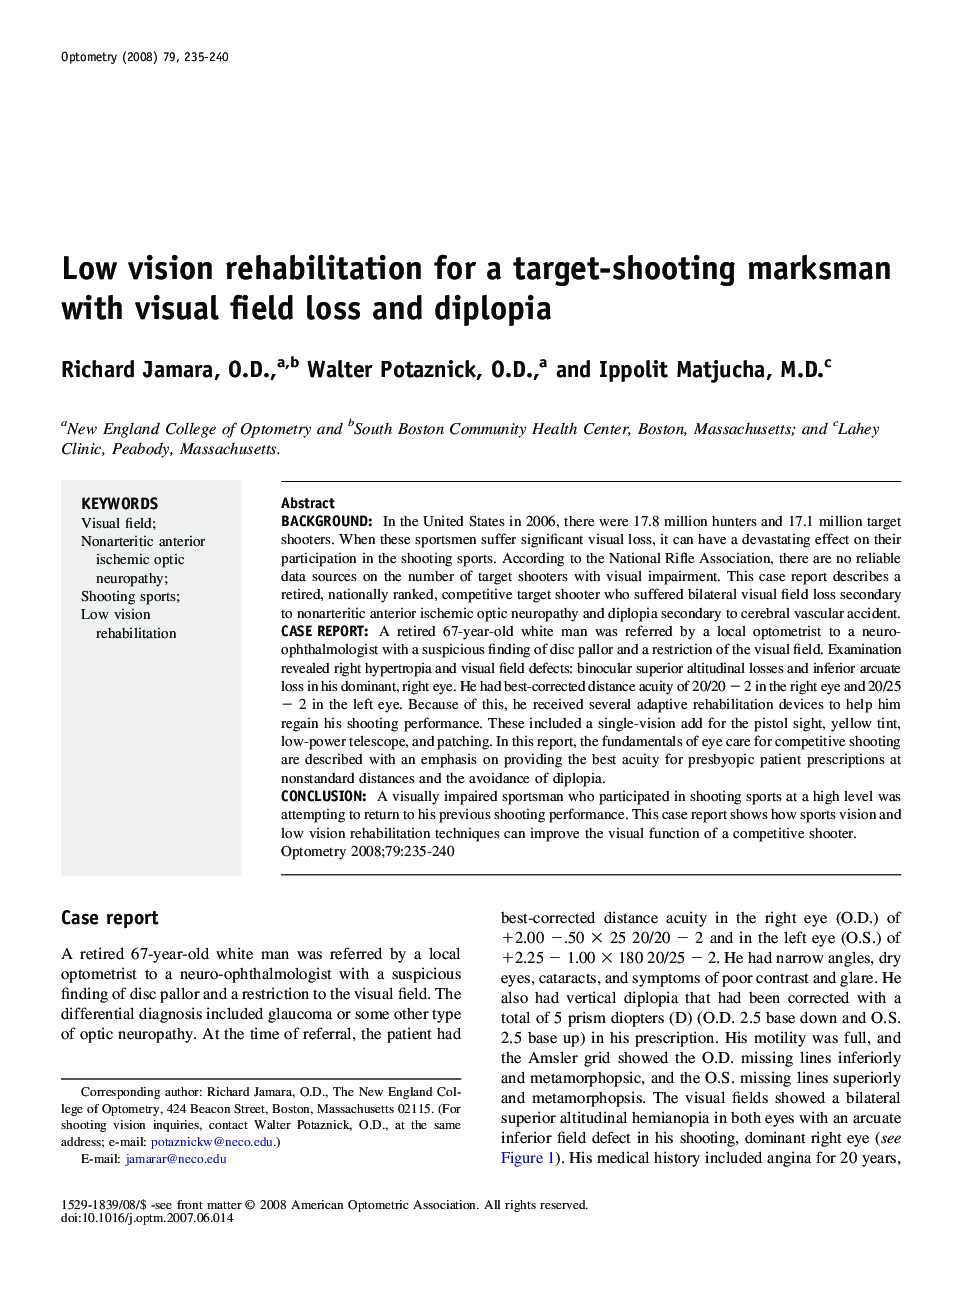 Low vision rehabilitation for a target-shooting marksman with visual field loss and diplopia